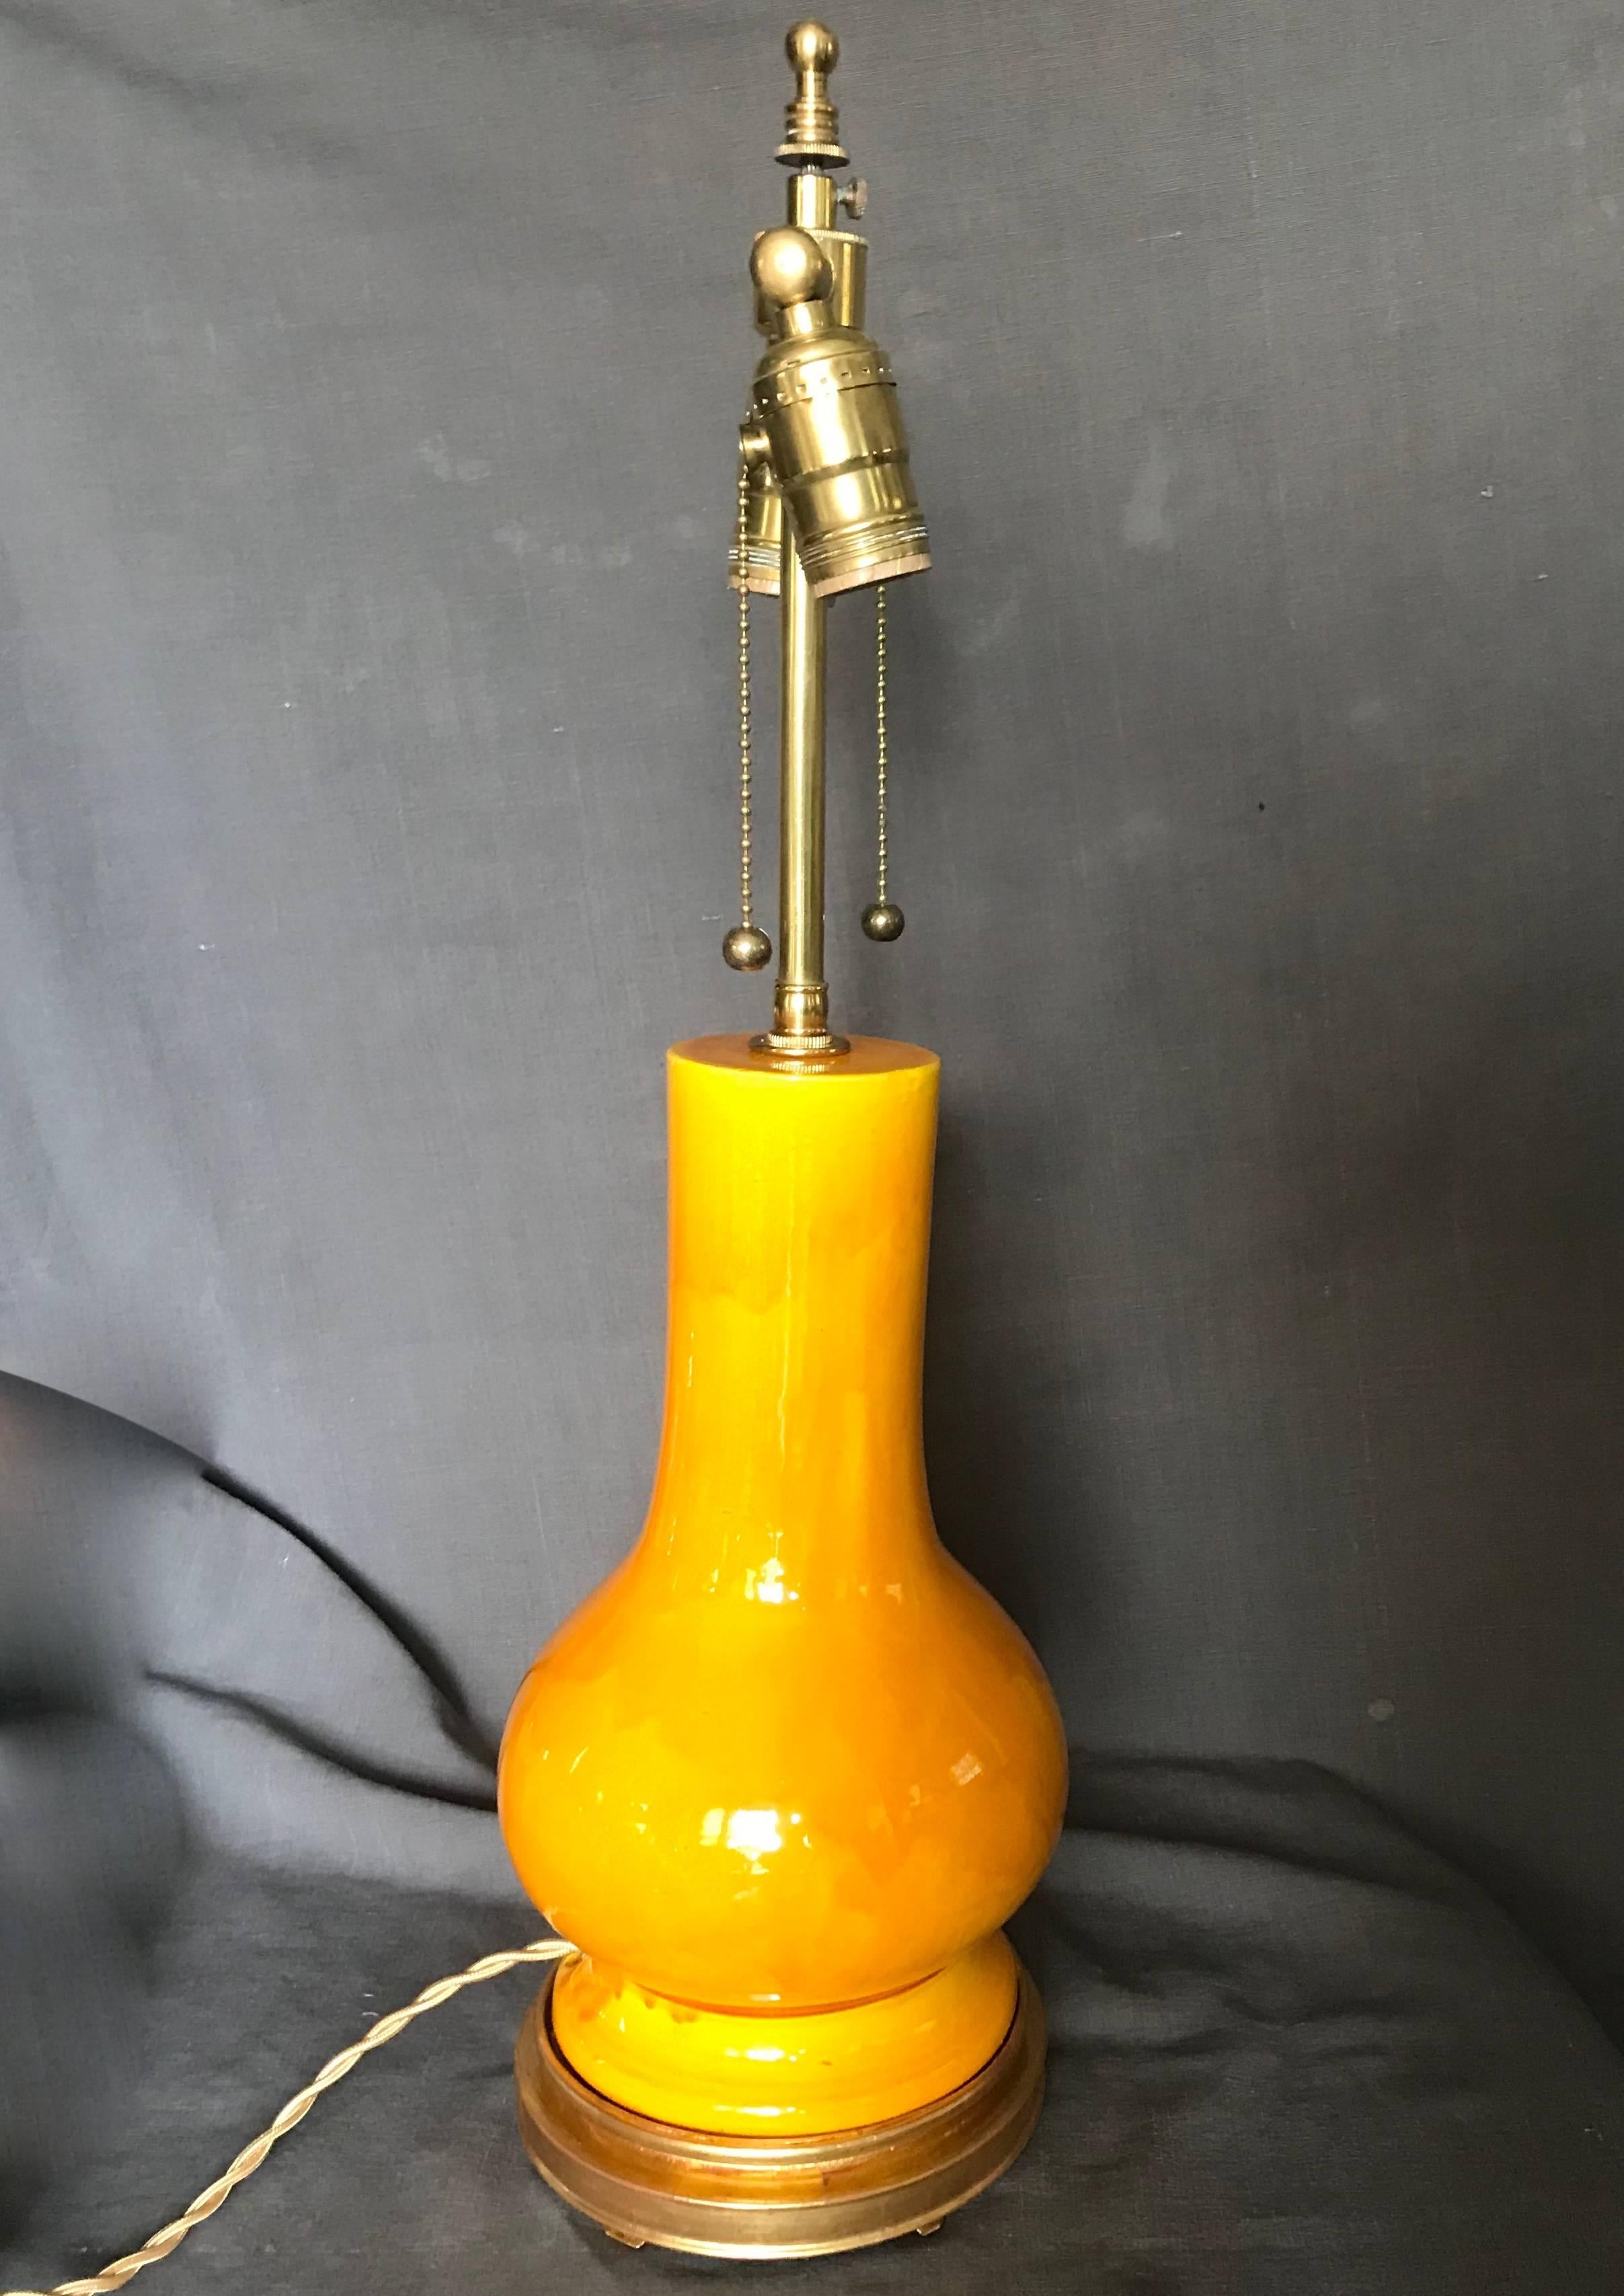 Vintage chrome yellow Japanese lamp on water gilt base. Vibrant yellow wash pottery lamp on newly gilt original thirties wood base; newly electrified with gold silk cord and switch. Japan, circa 1930
Dimensions: 6.5